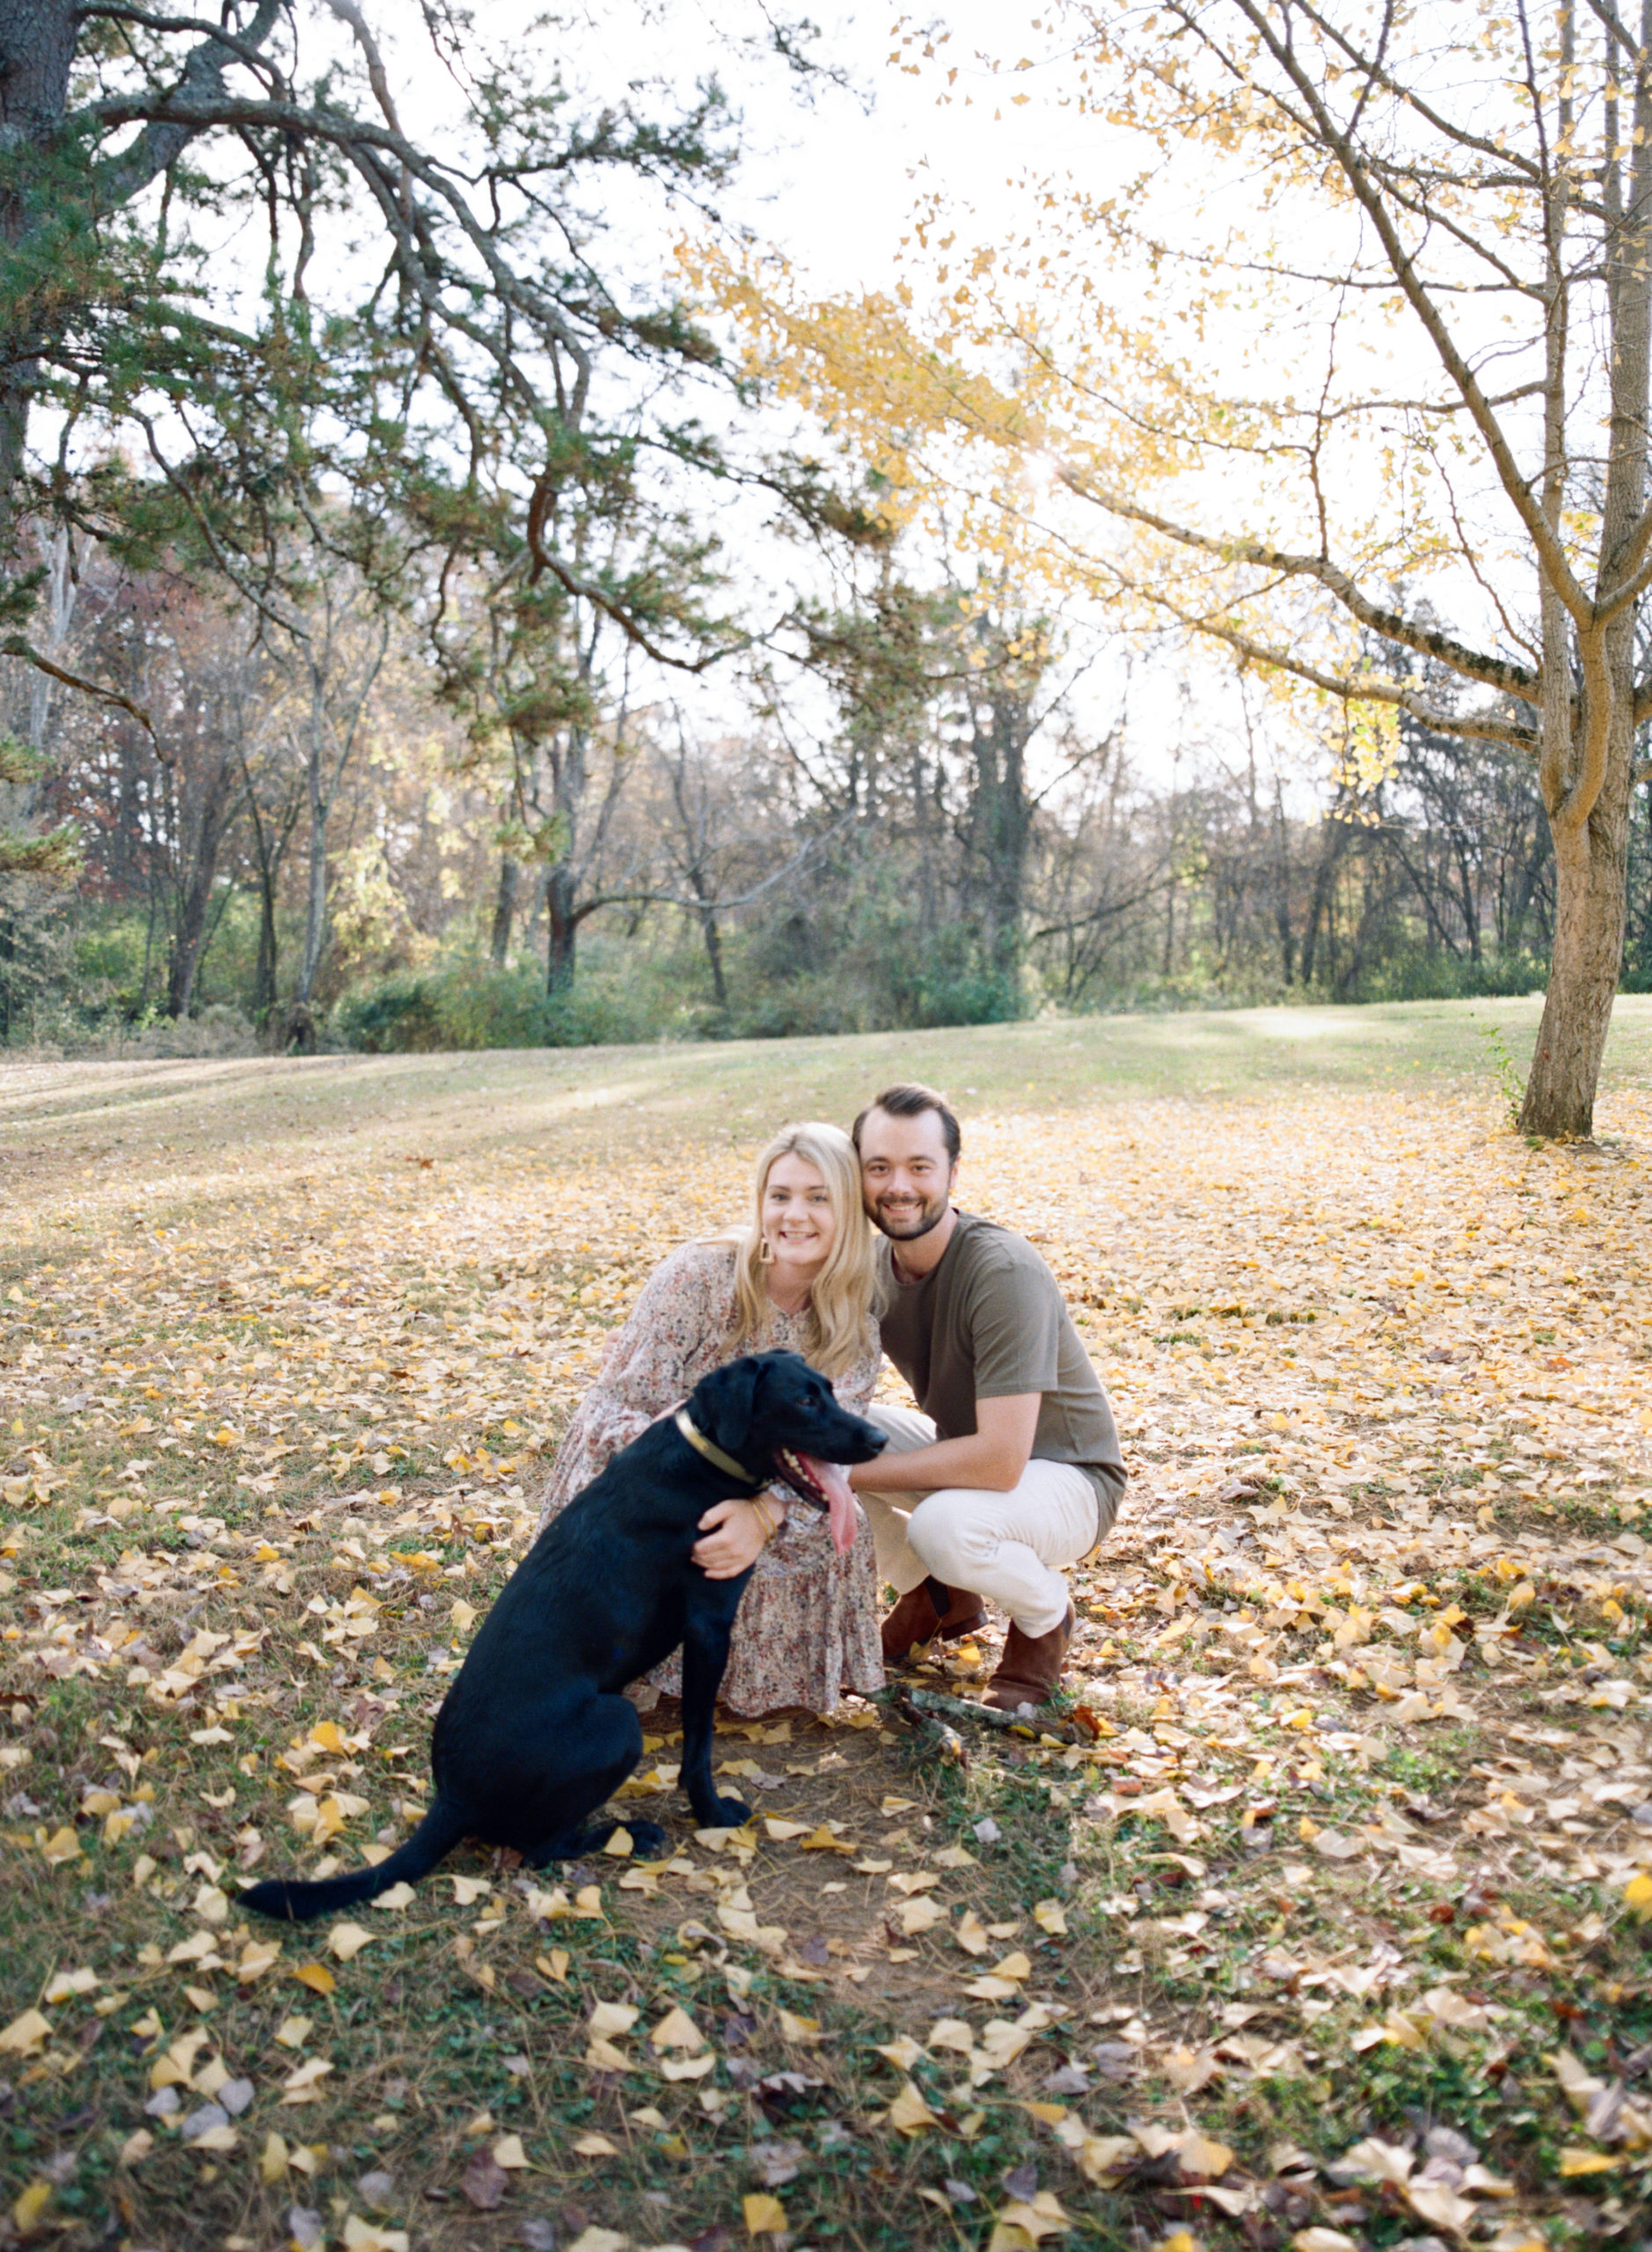 Fall couples portrait session in Springbrook Park, Alcoa, Tennessee by Jillian Adams Photography